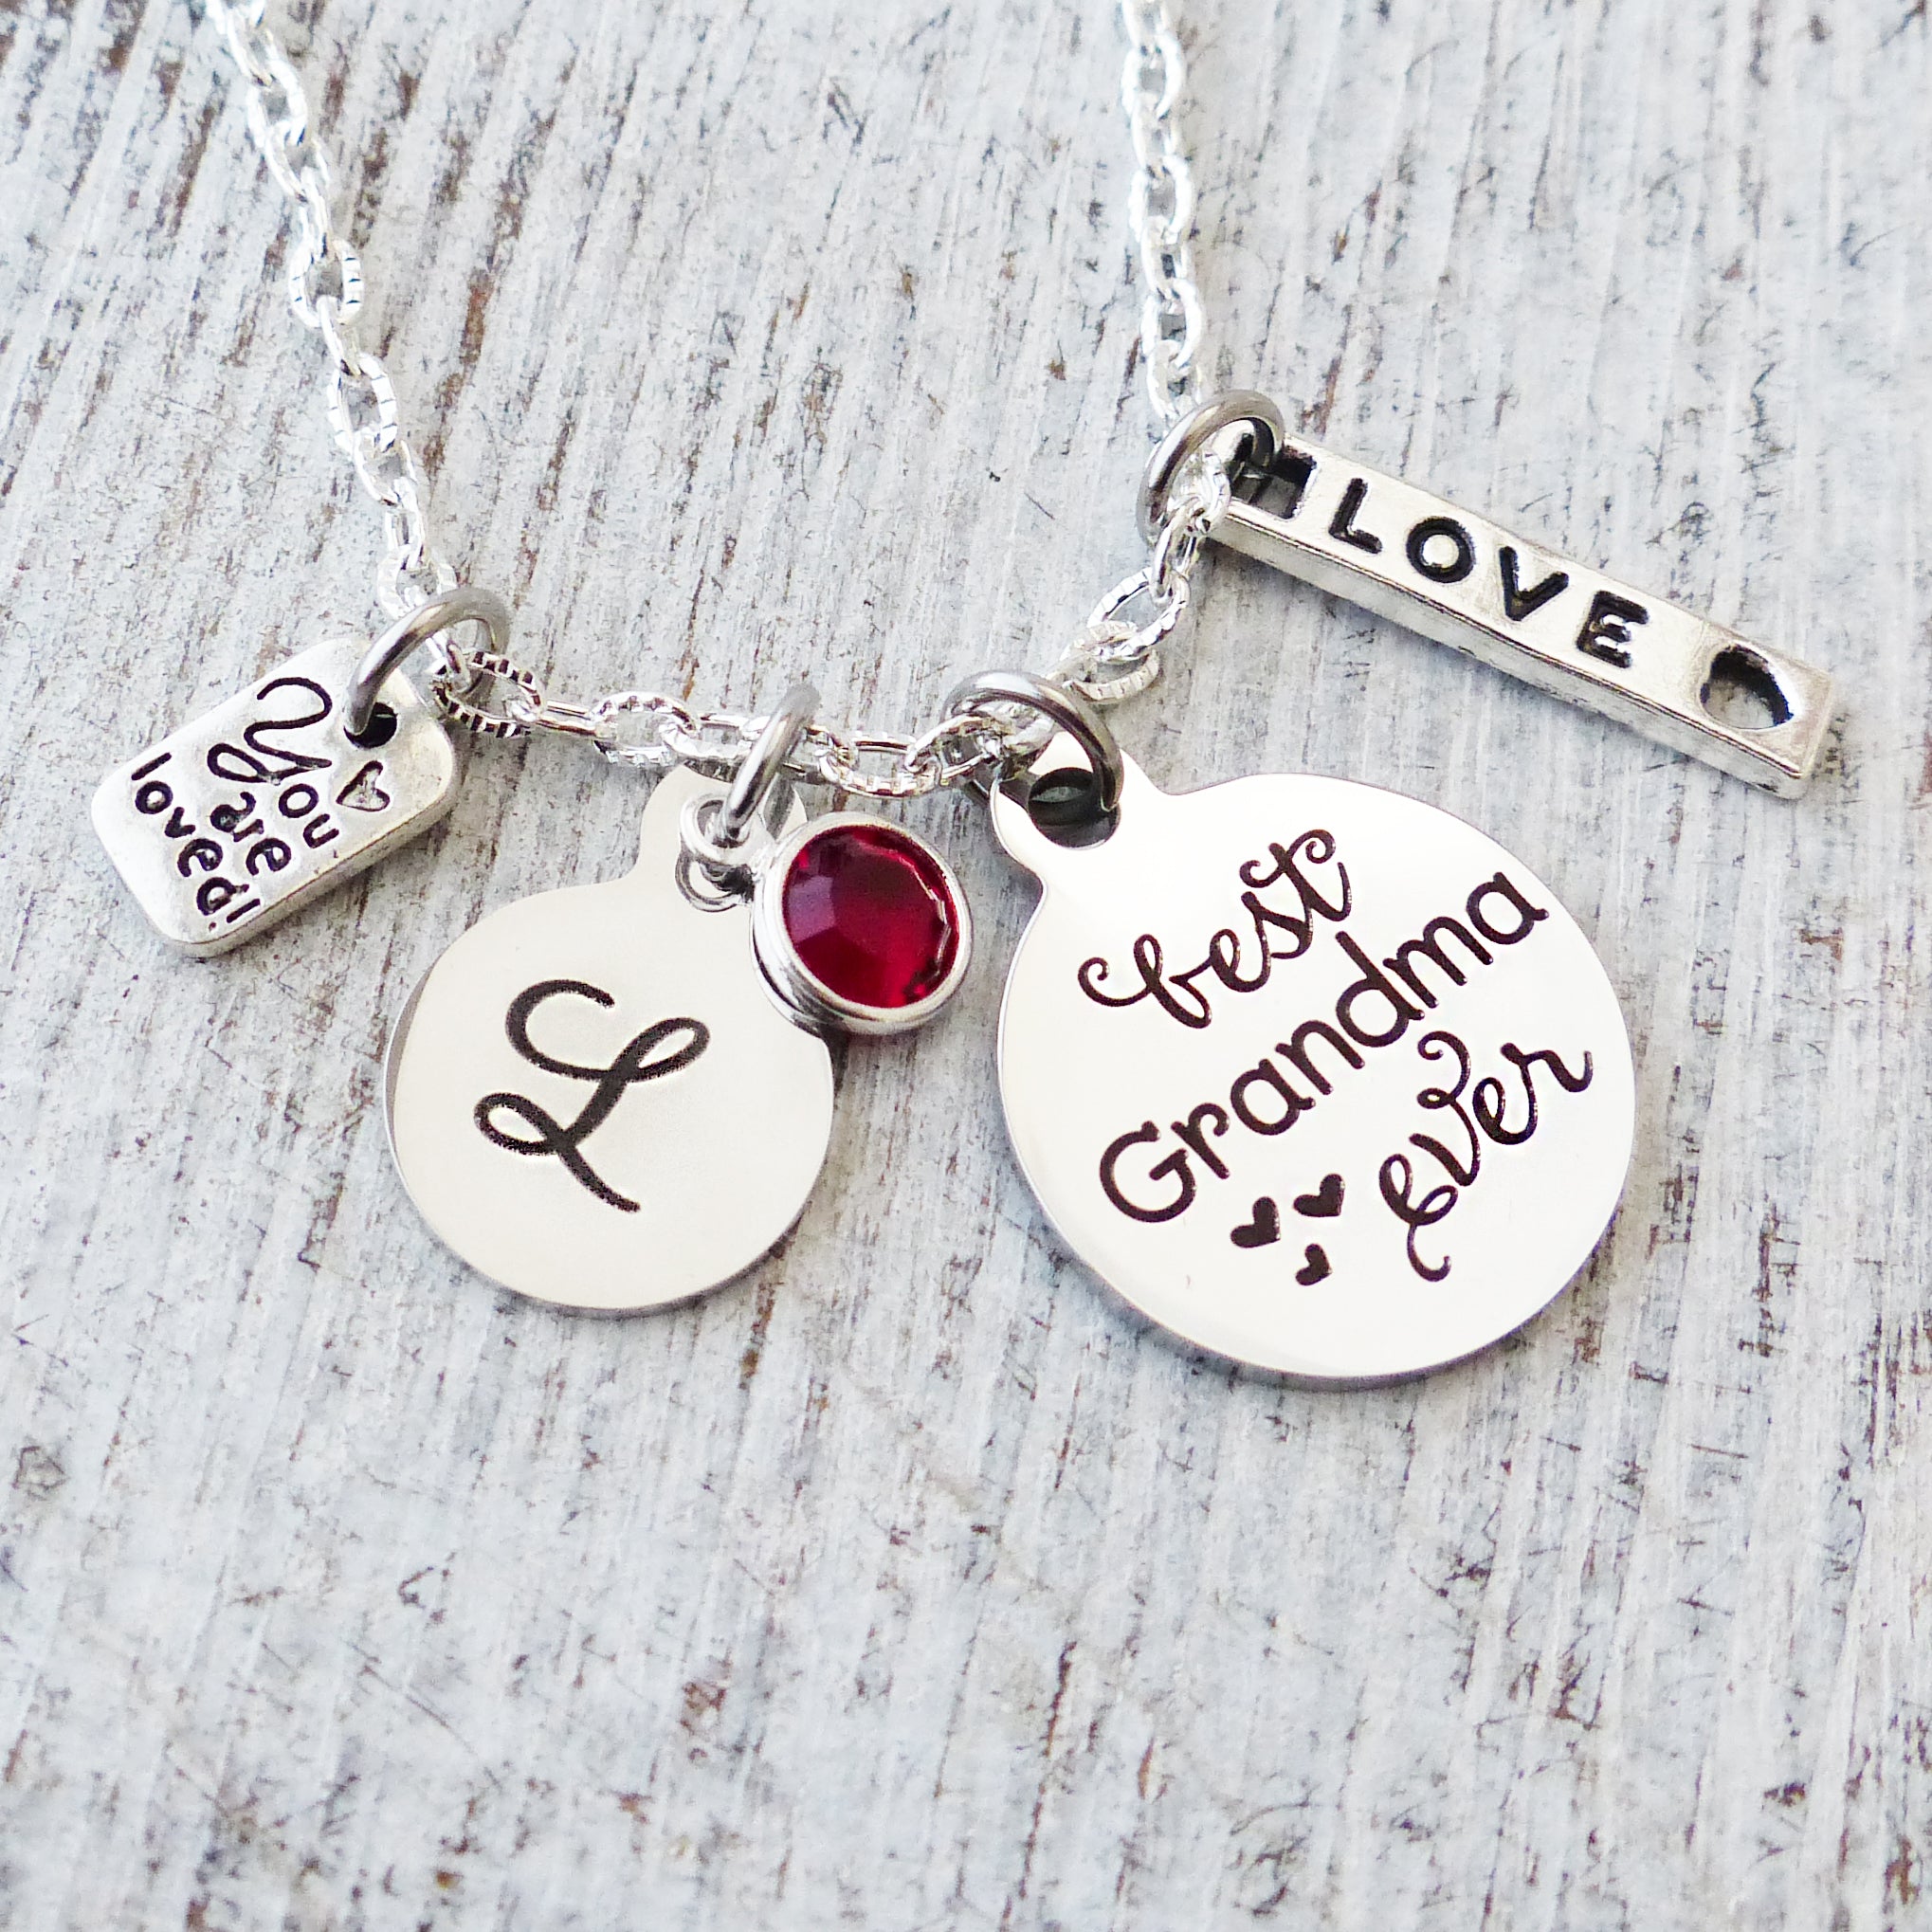 Grandma Gifts for Mother's Day, Best Grandma Ever Personalized Necklace, Birthstone, You are Loved, Family Tree, Birthday Gifts for Grandma